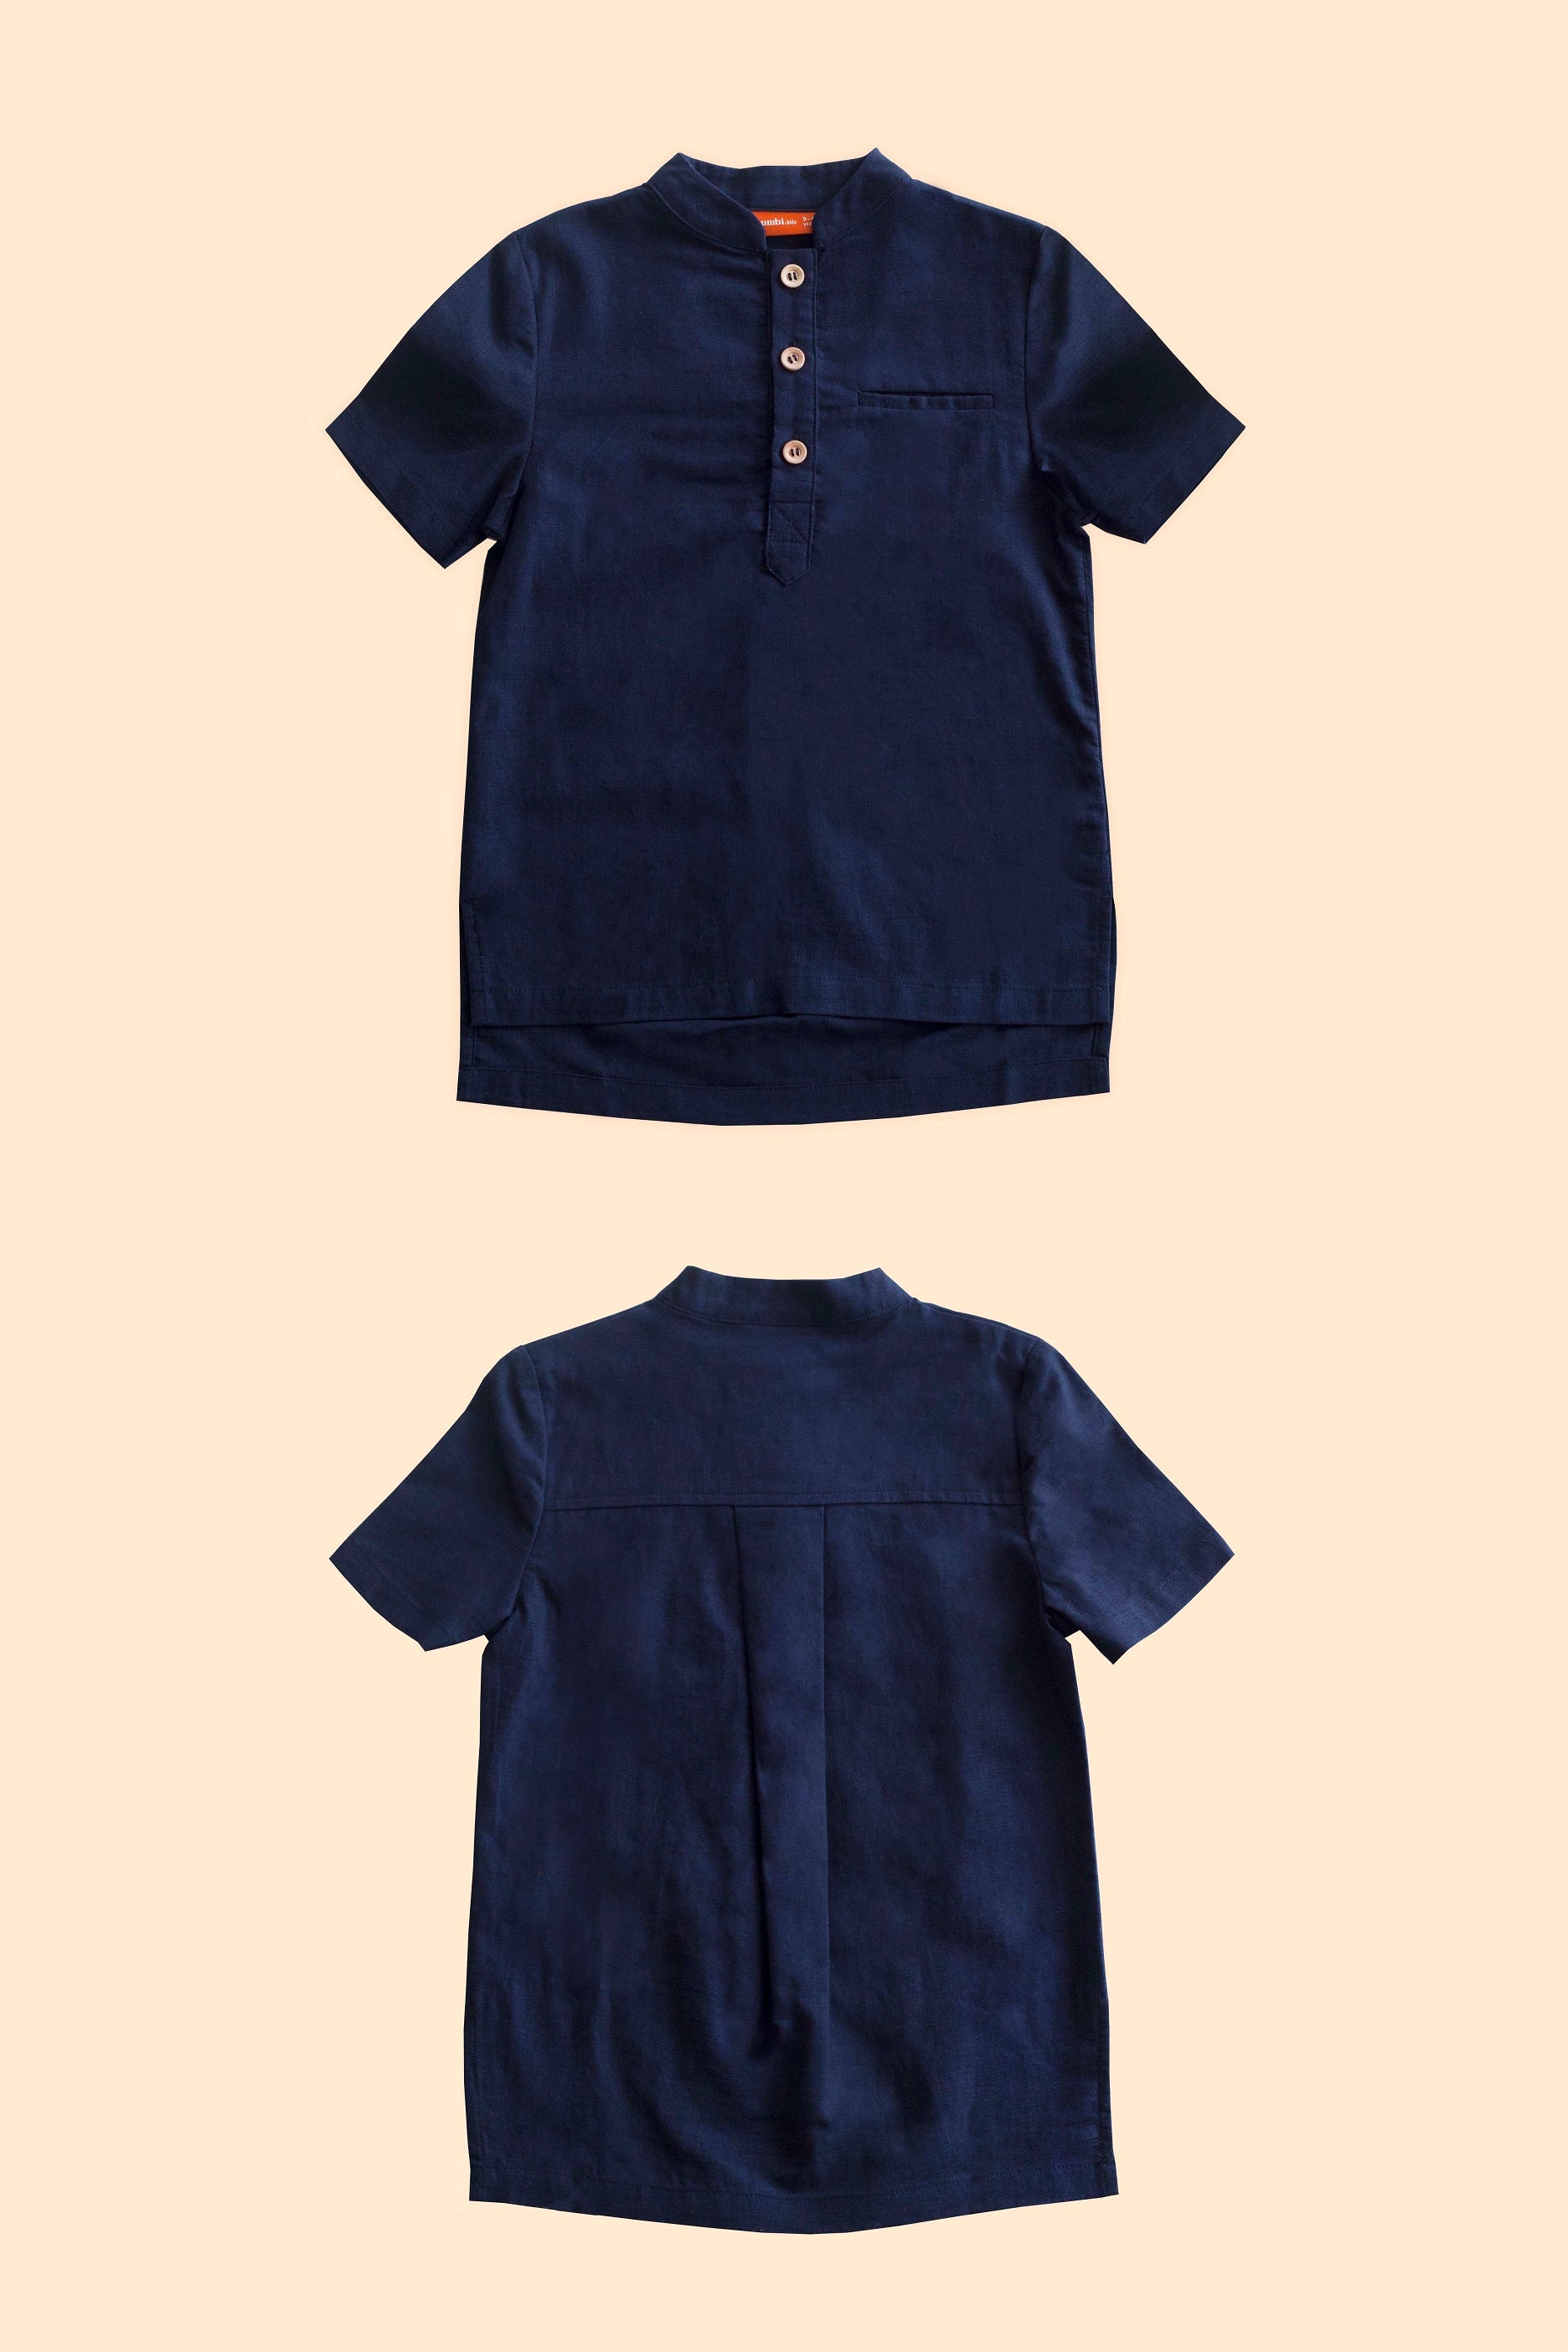 The Cahya Short Sleeves Top Navy Blue